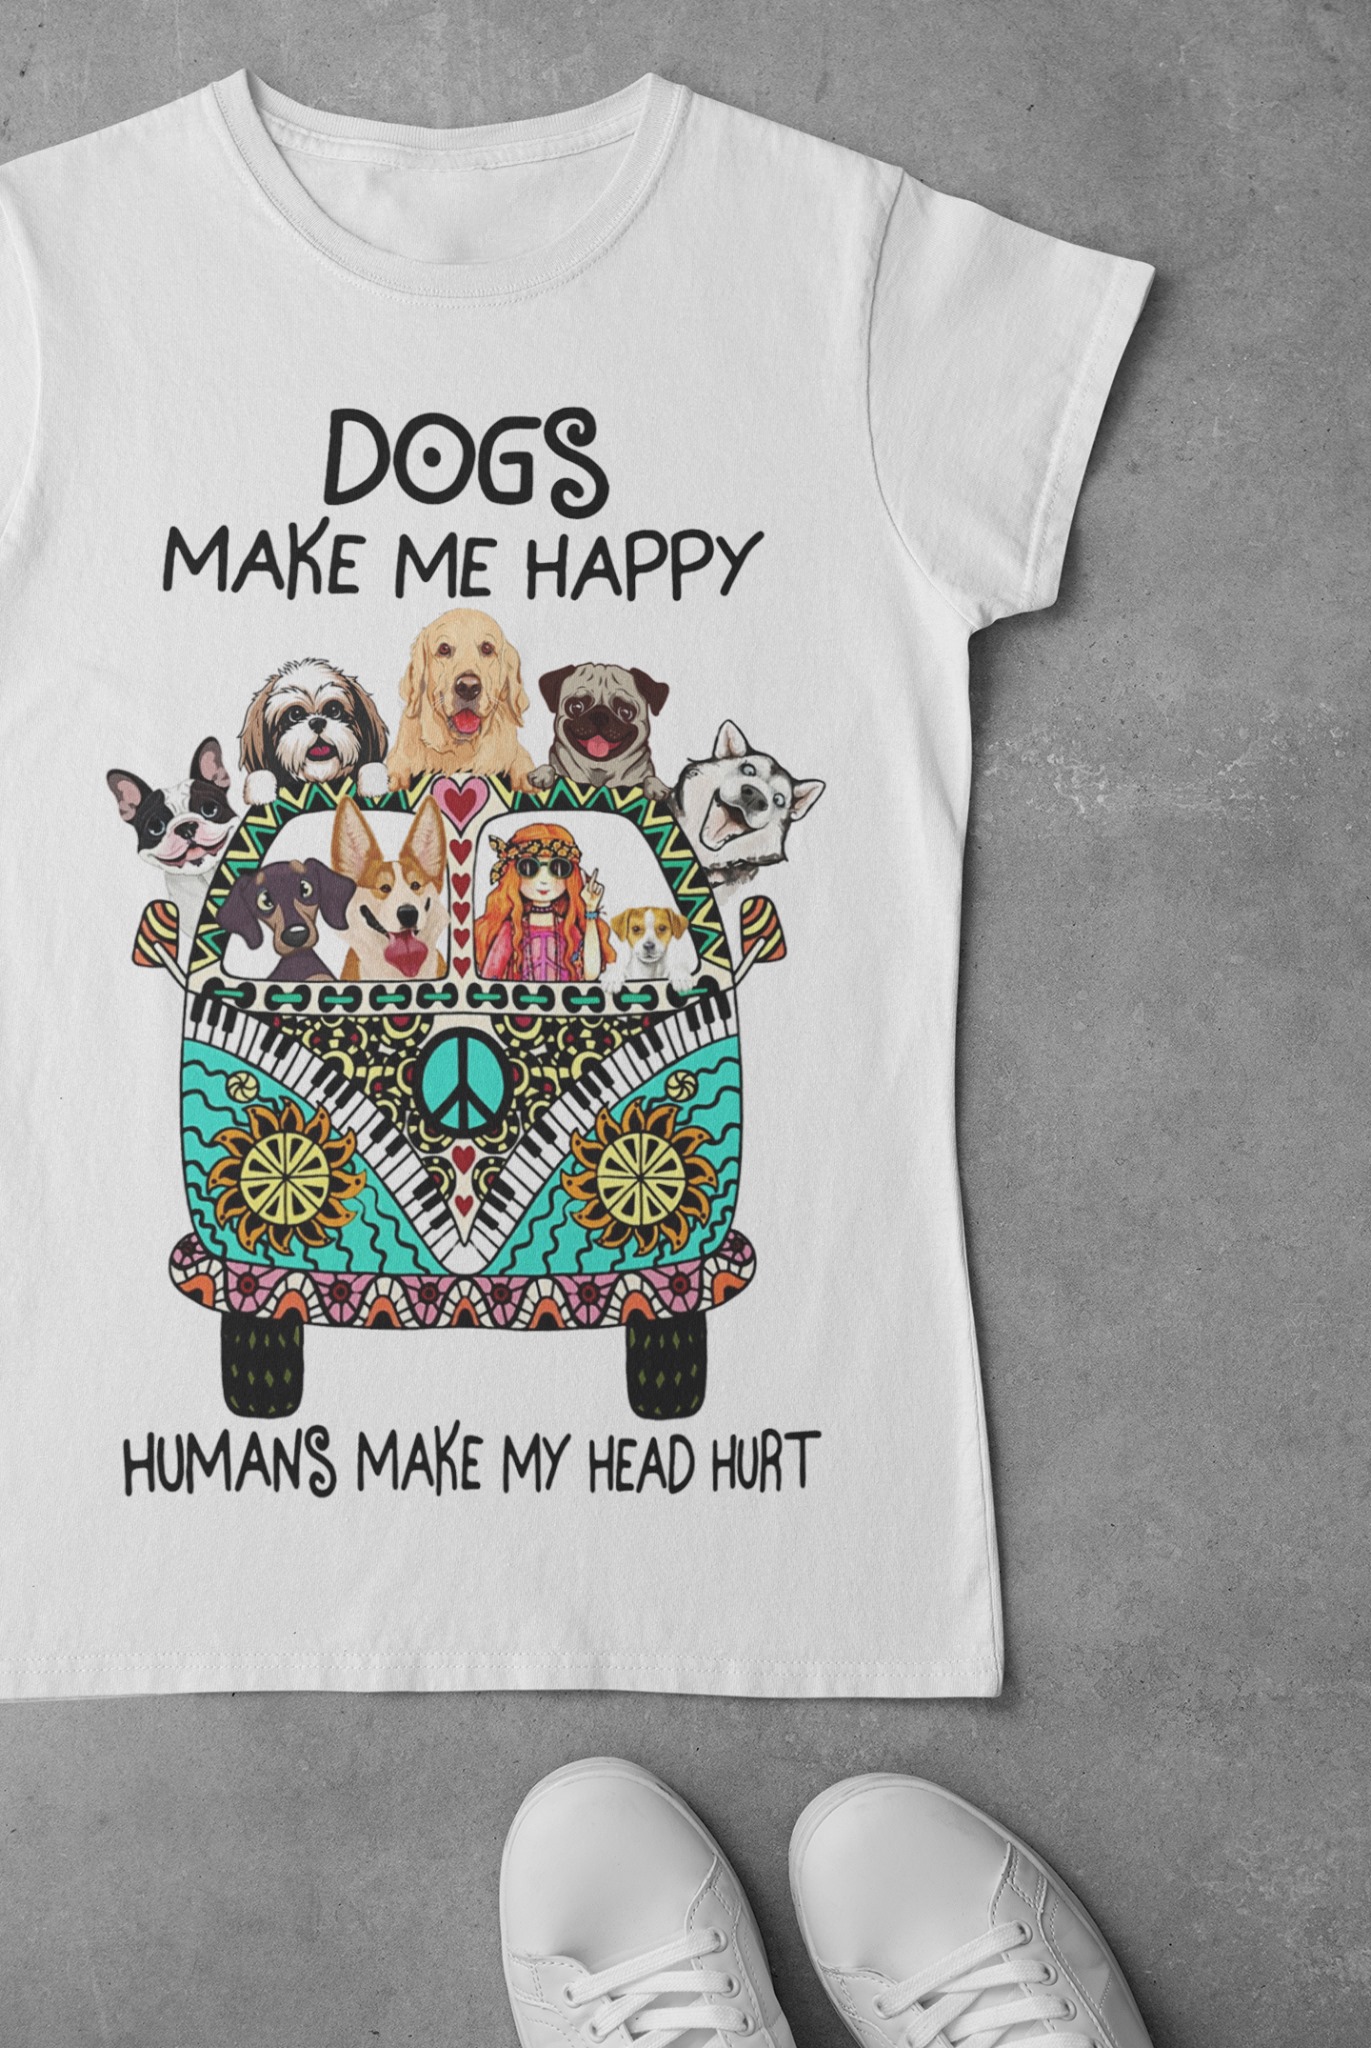 Dogs make me happy humans make my head hurt - Girl loves dogs